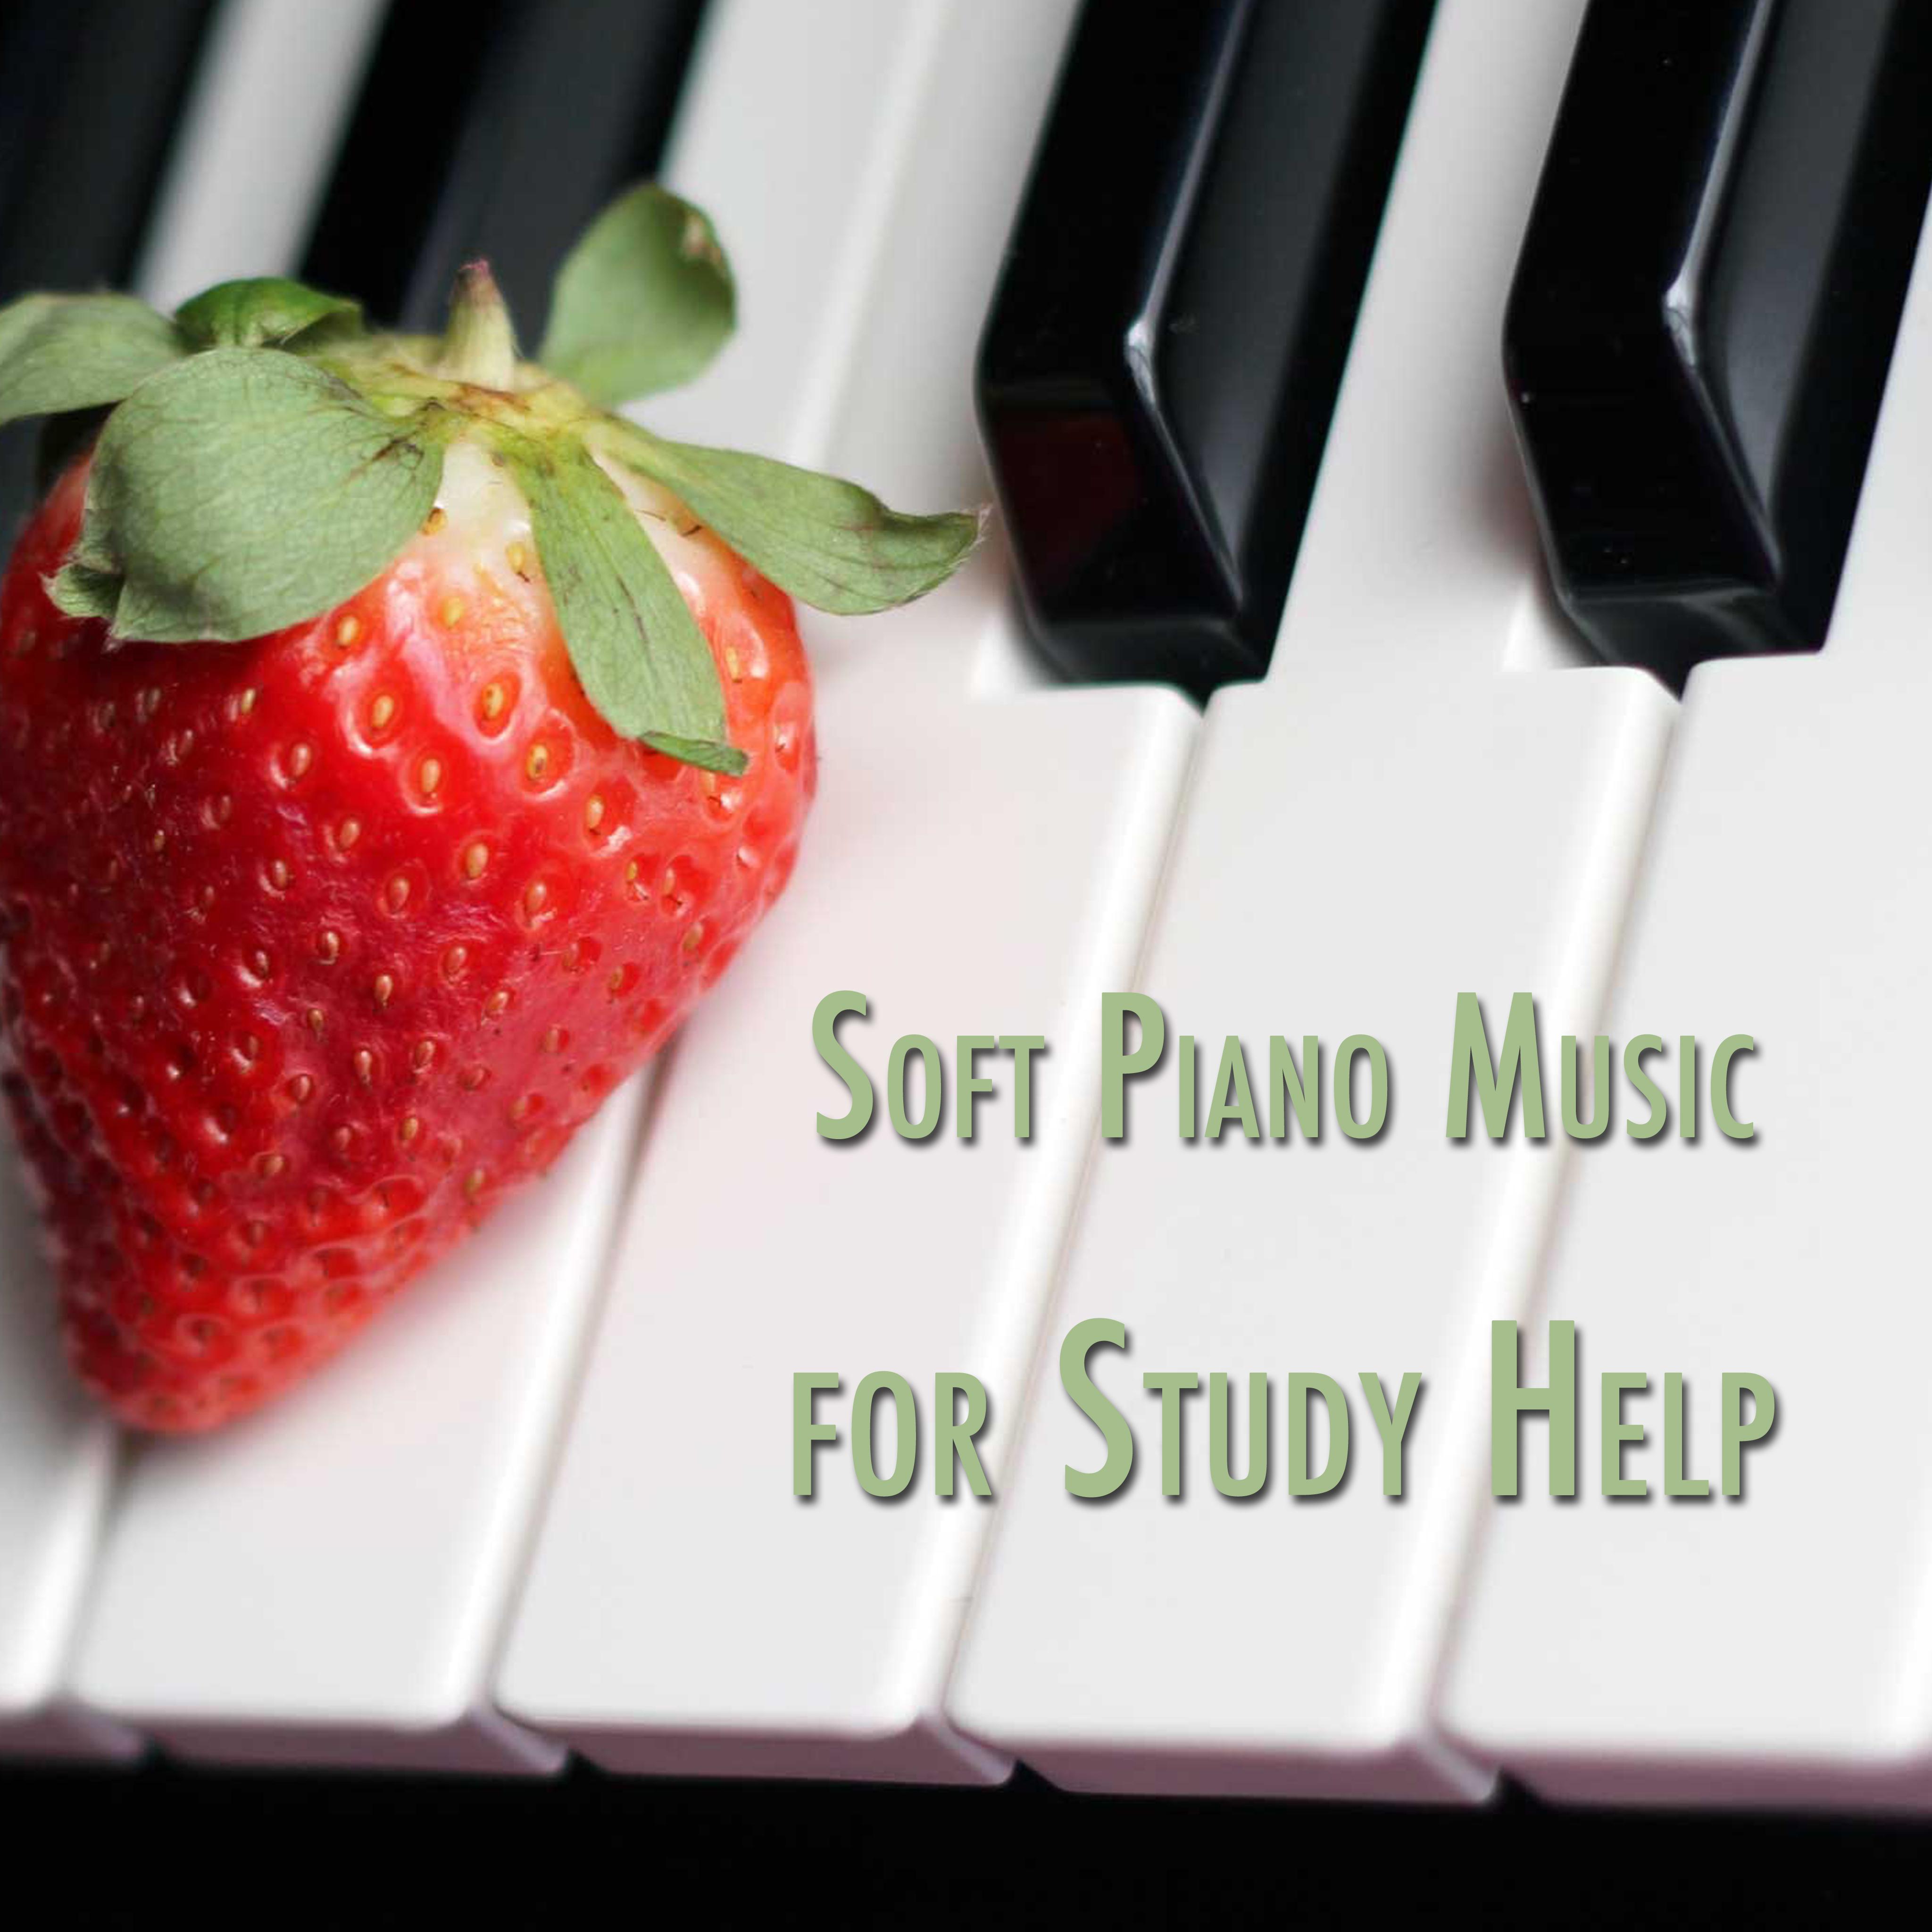 12 Classical Songs: Soft Piano Music for Study Help